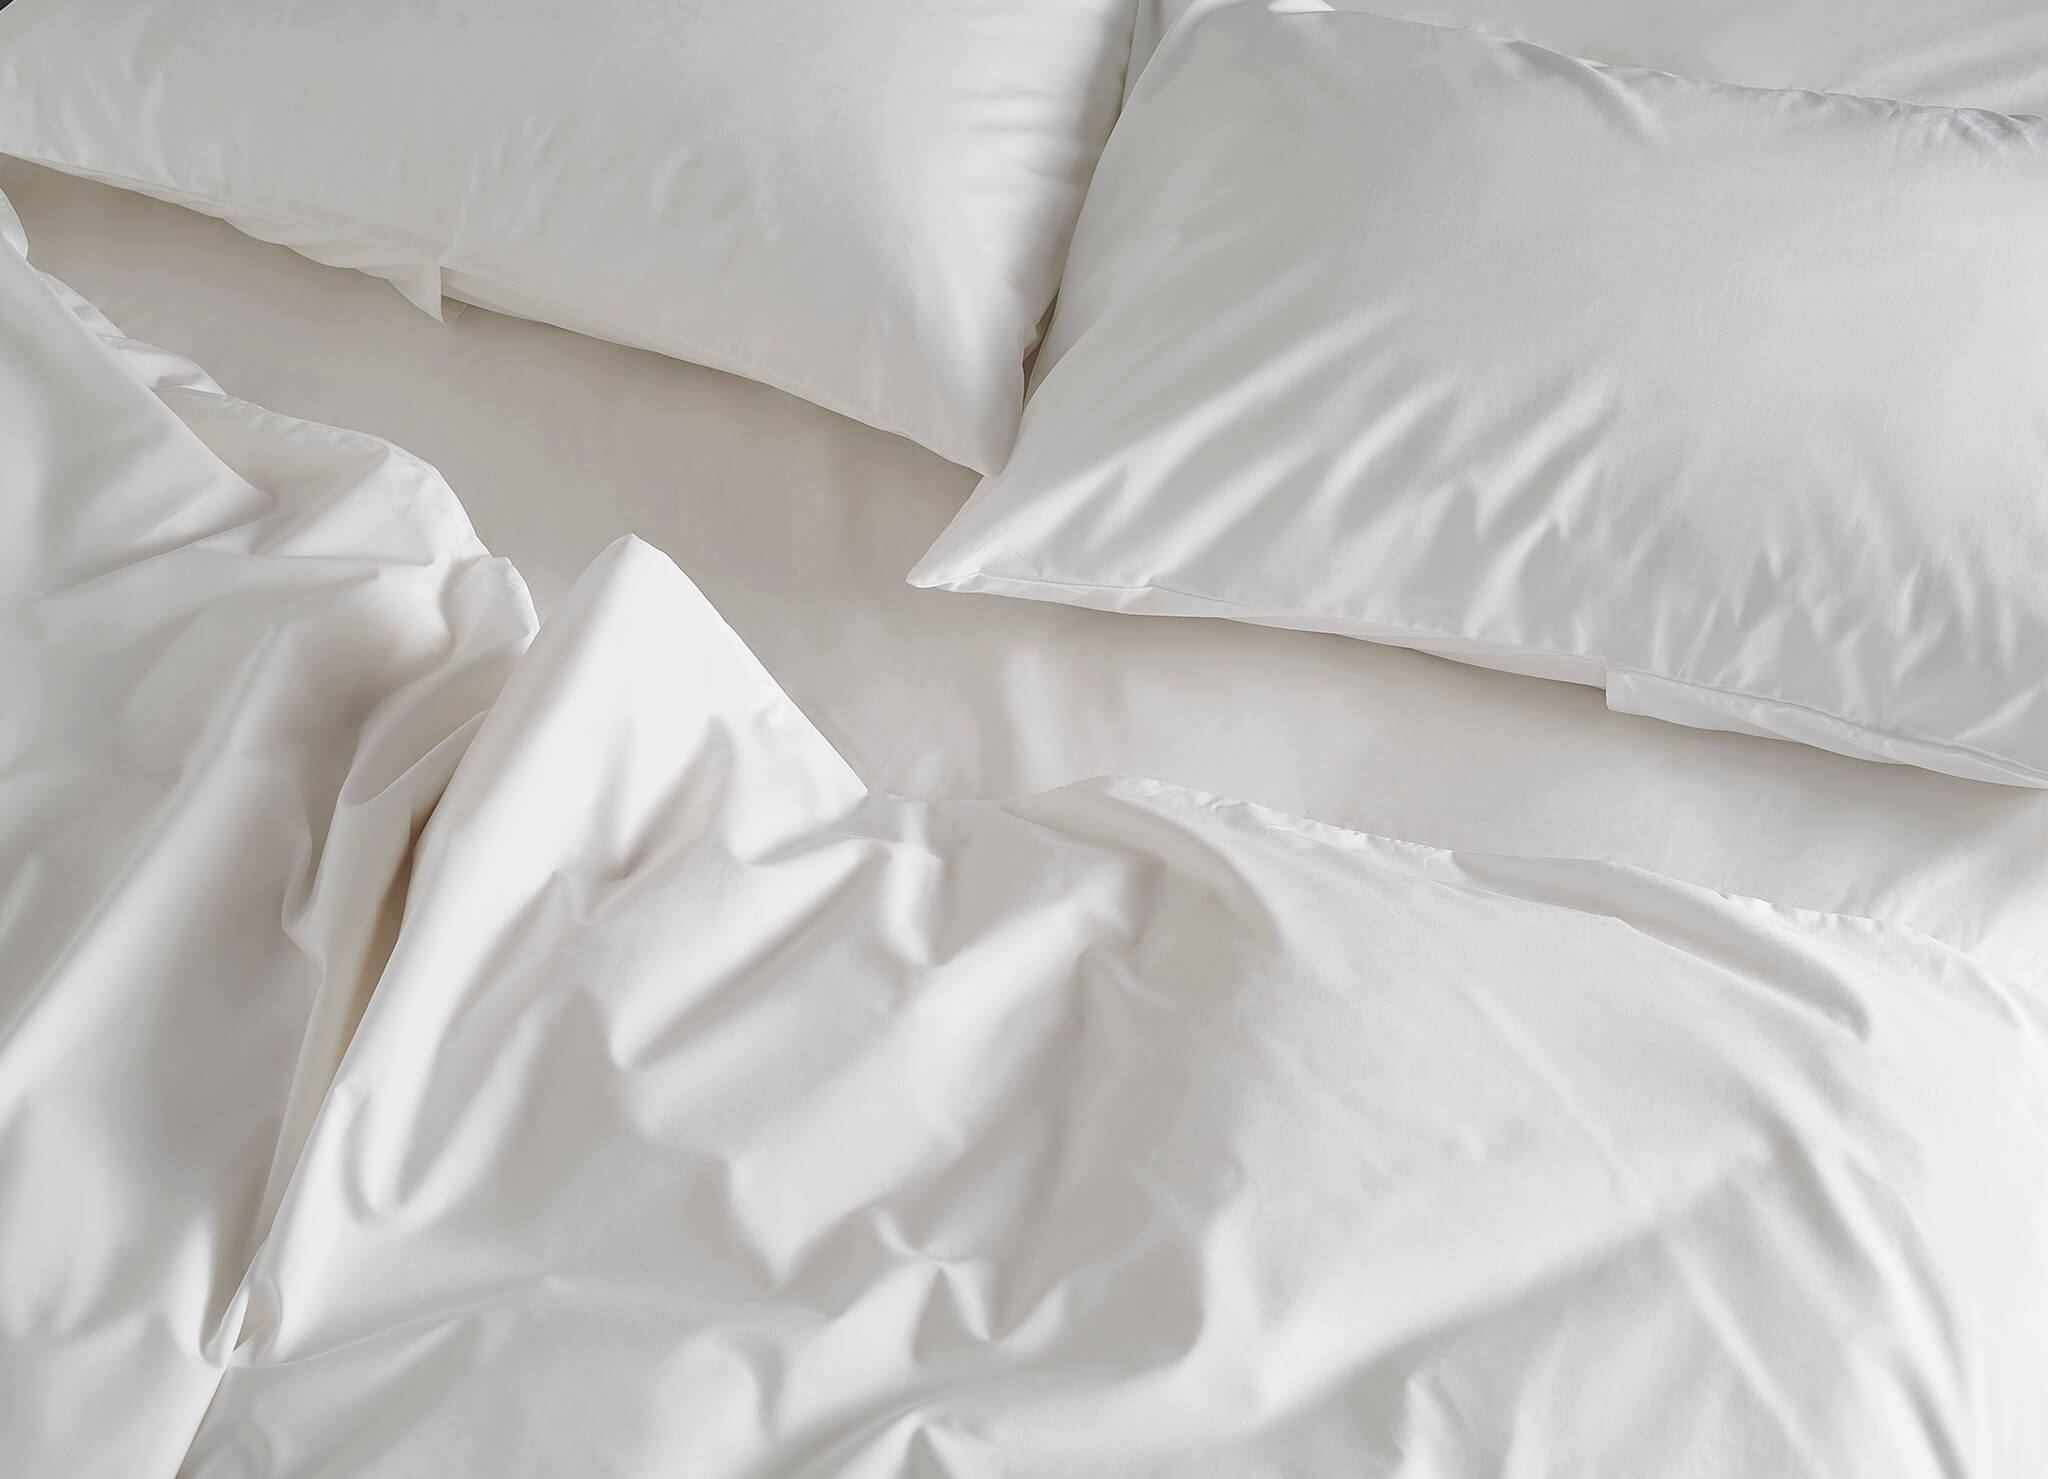 3 thread count myths you need to know – Pillow Guy